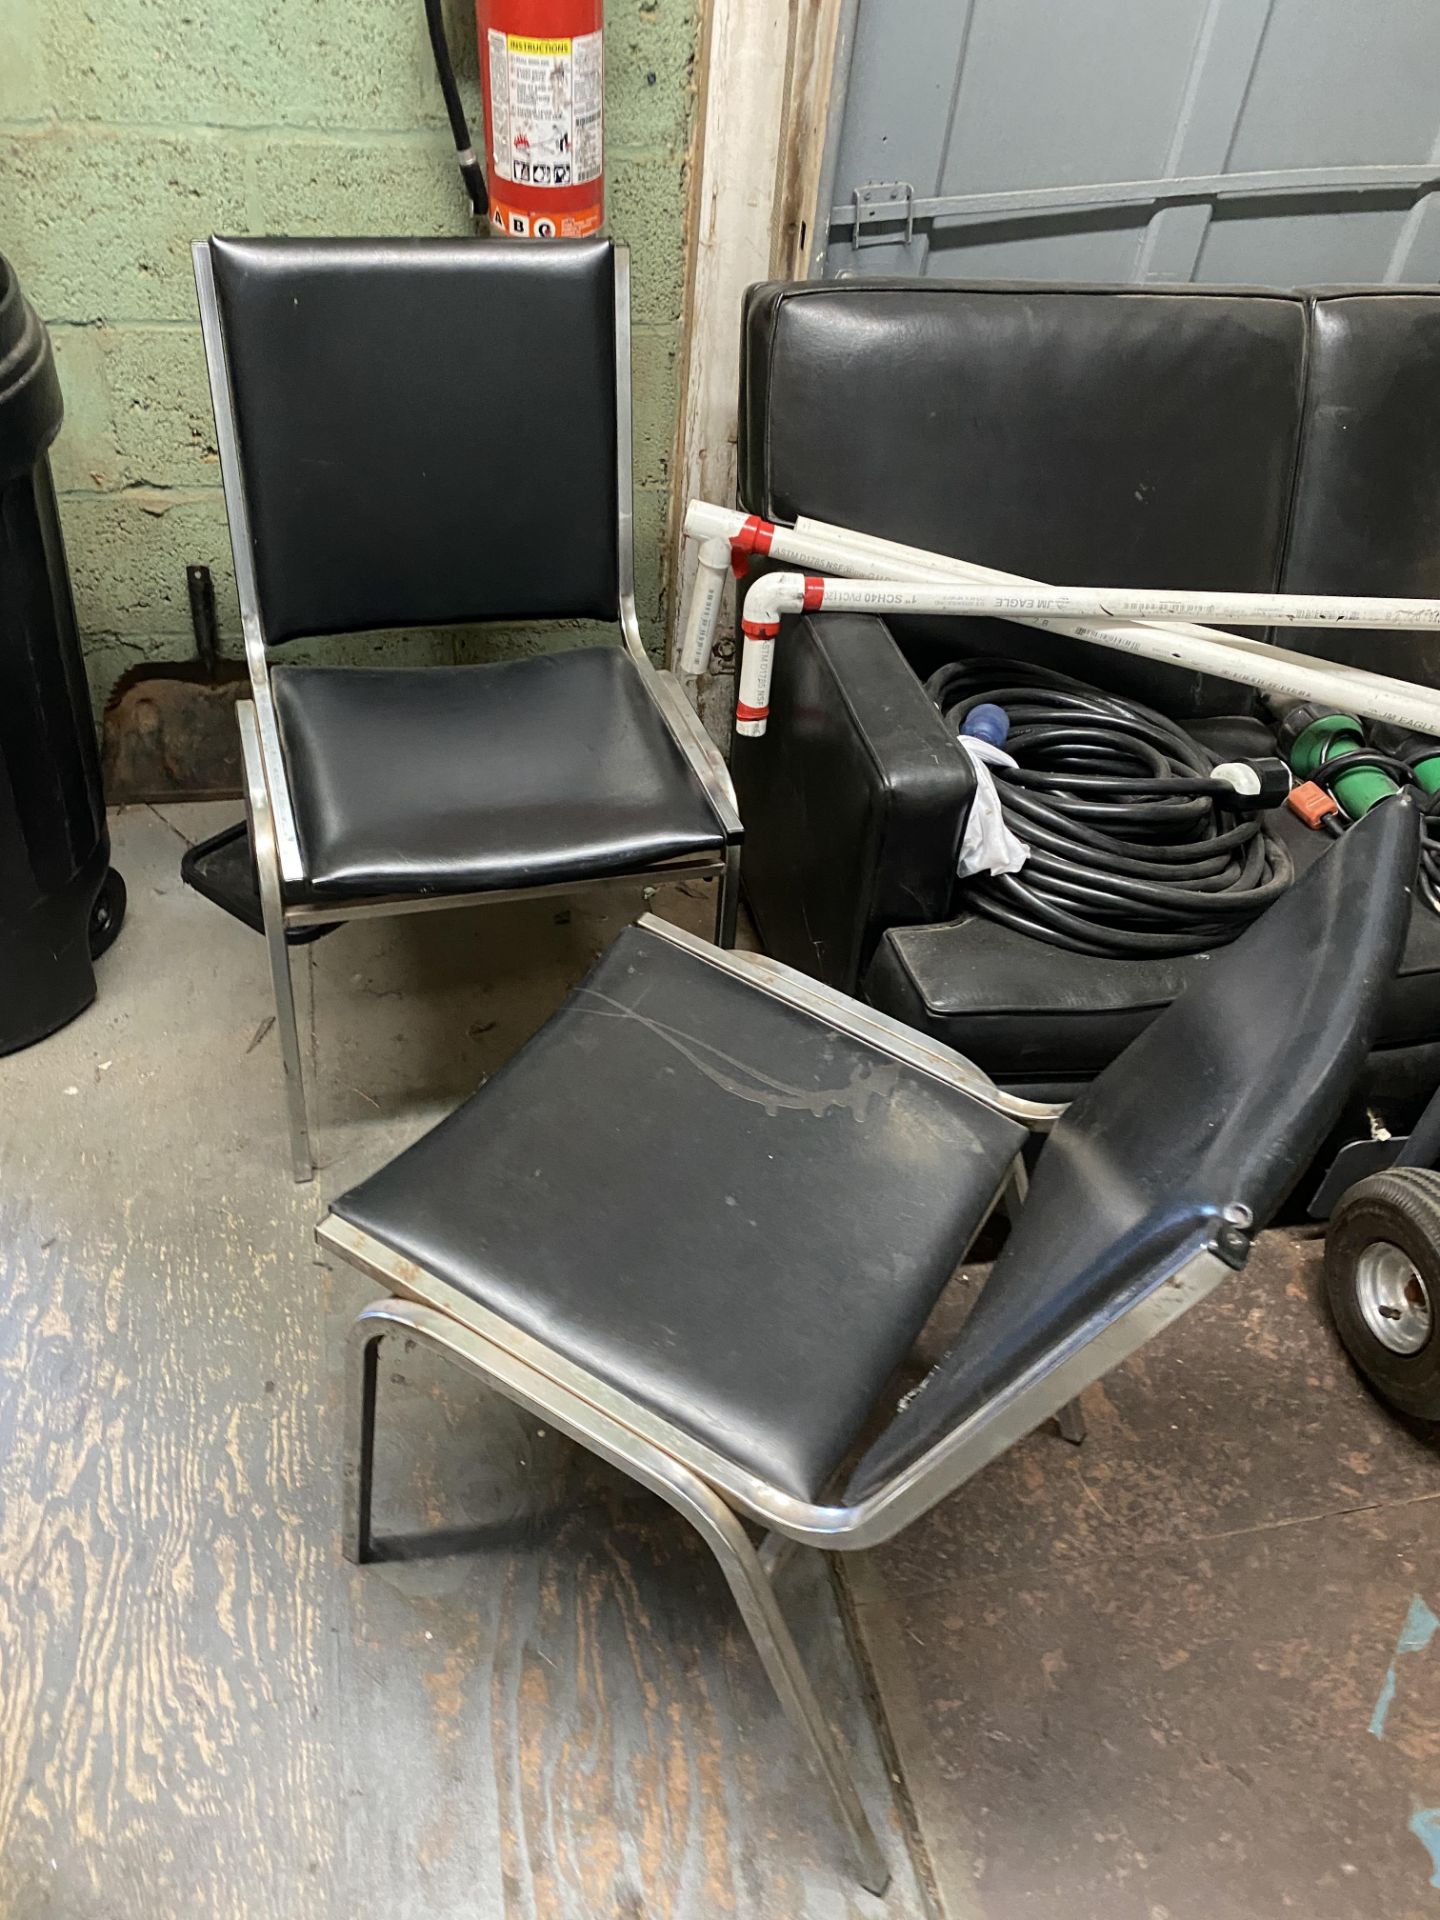 (Lot) 10 Asst. Chairs, c/o: Folding, Office Chairs In Warehouse - Image 4 of 5